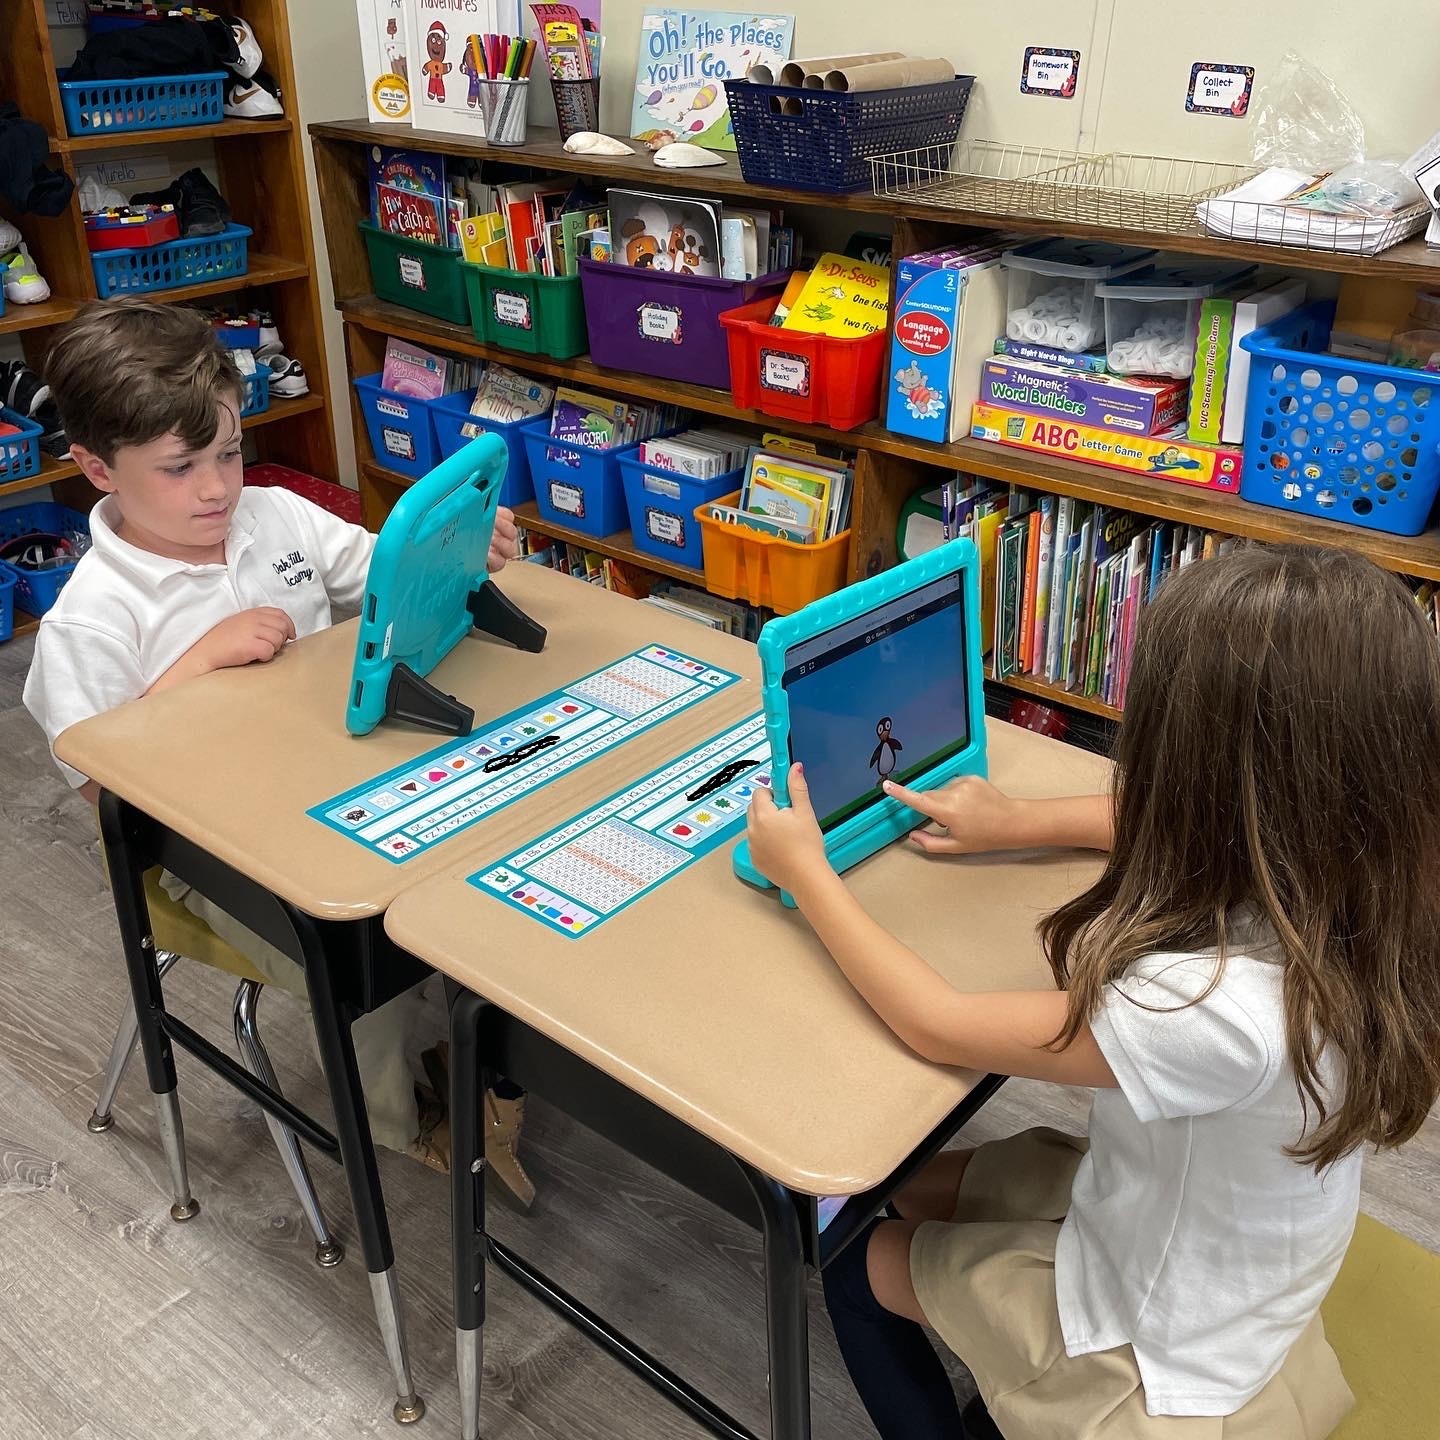 NJ Private School Blog - Are Video Games Good for Learning?